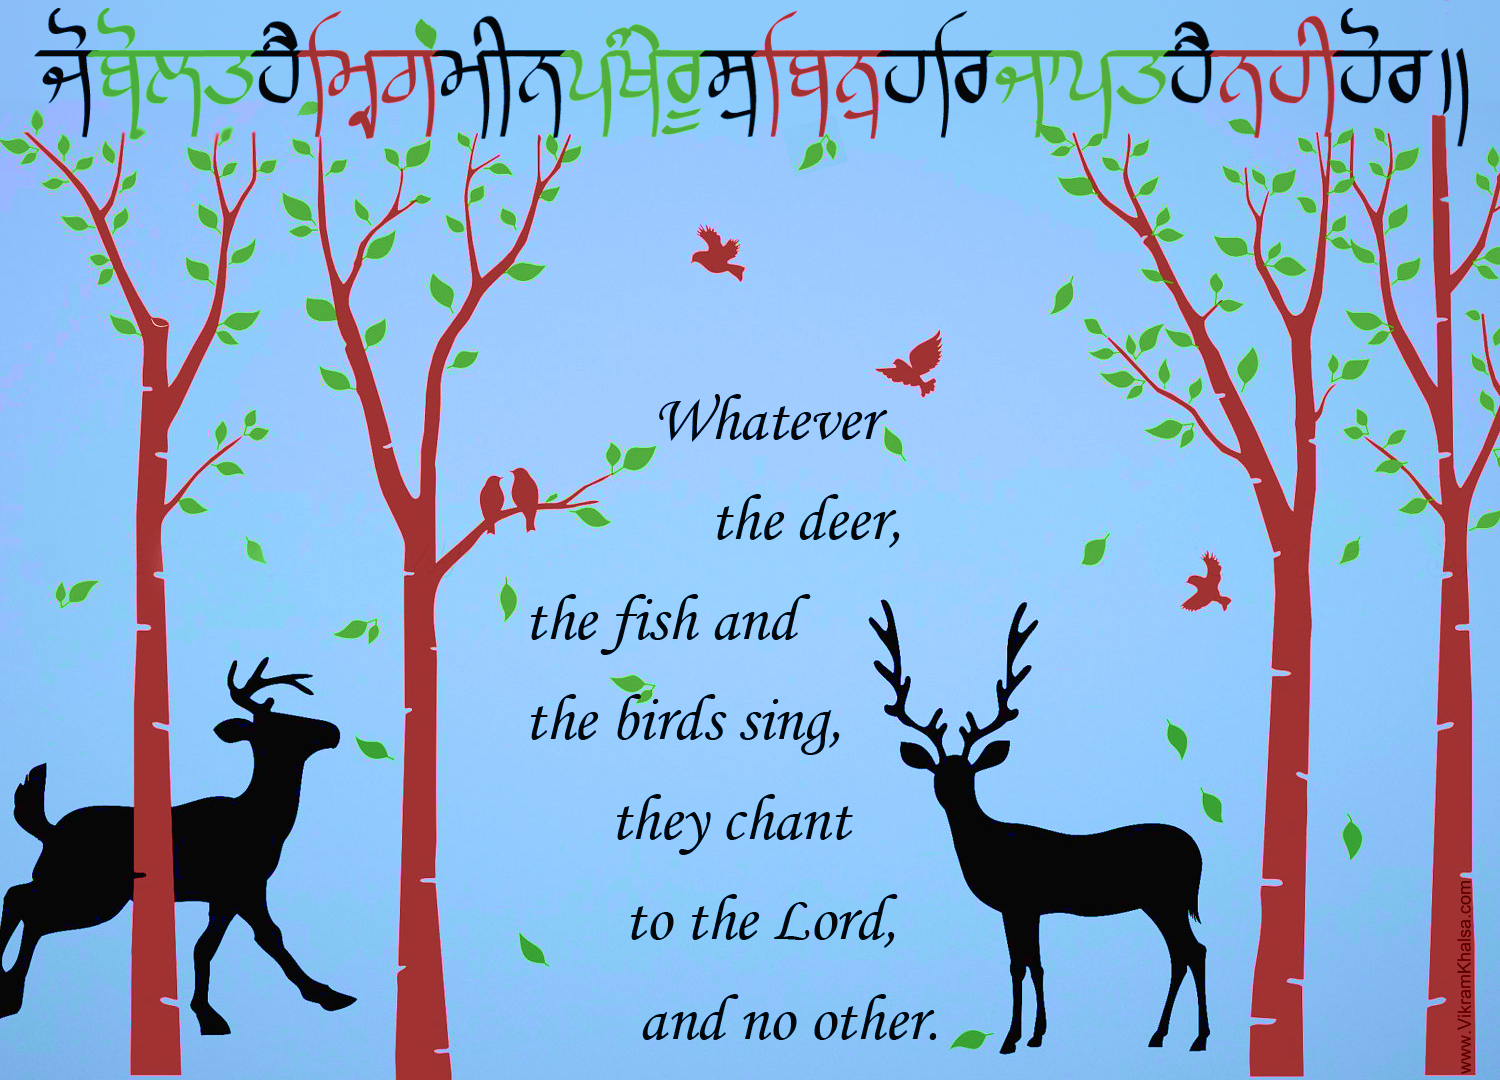 Even the birds and the deer sing to you